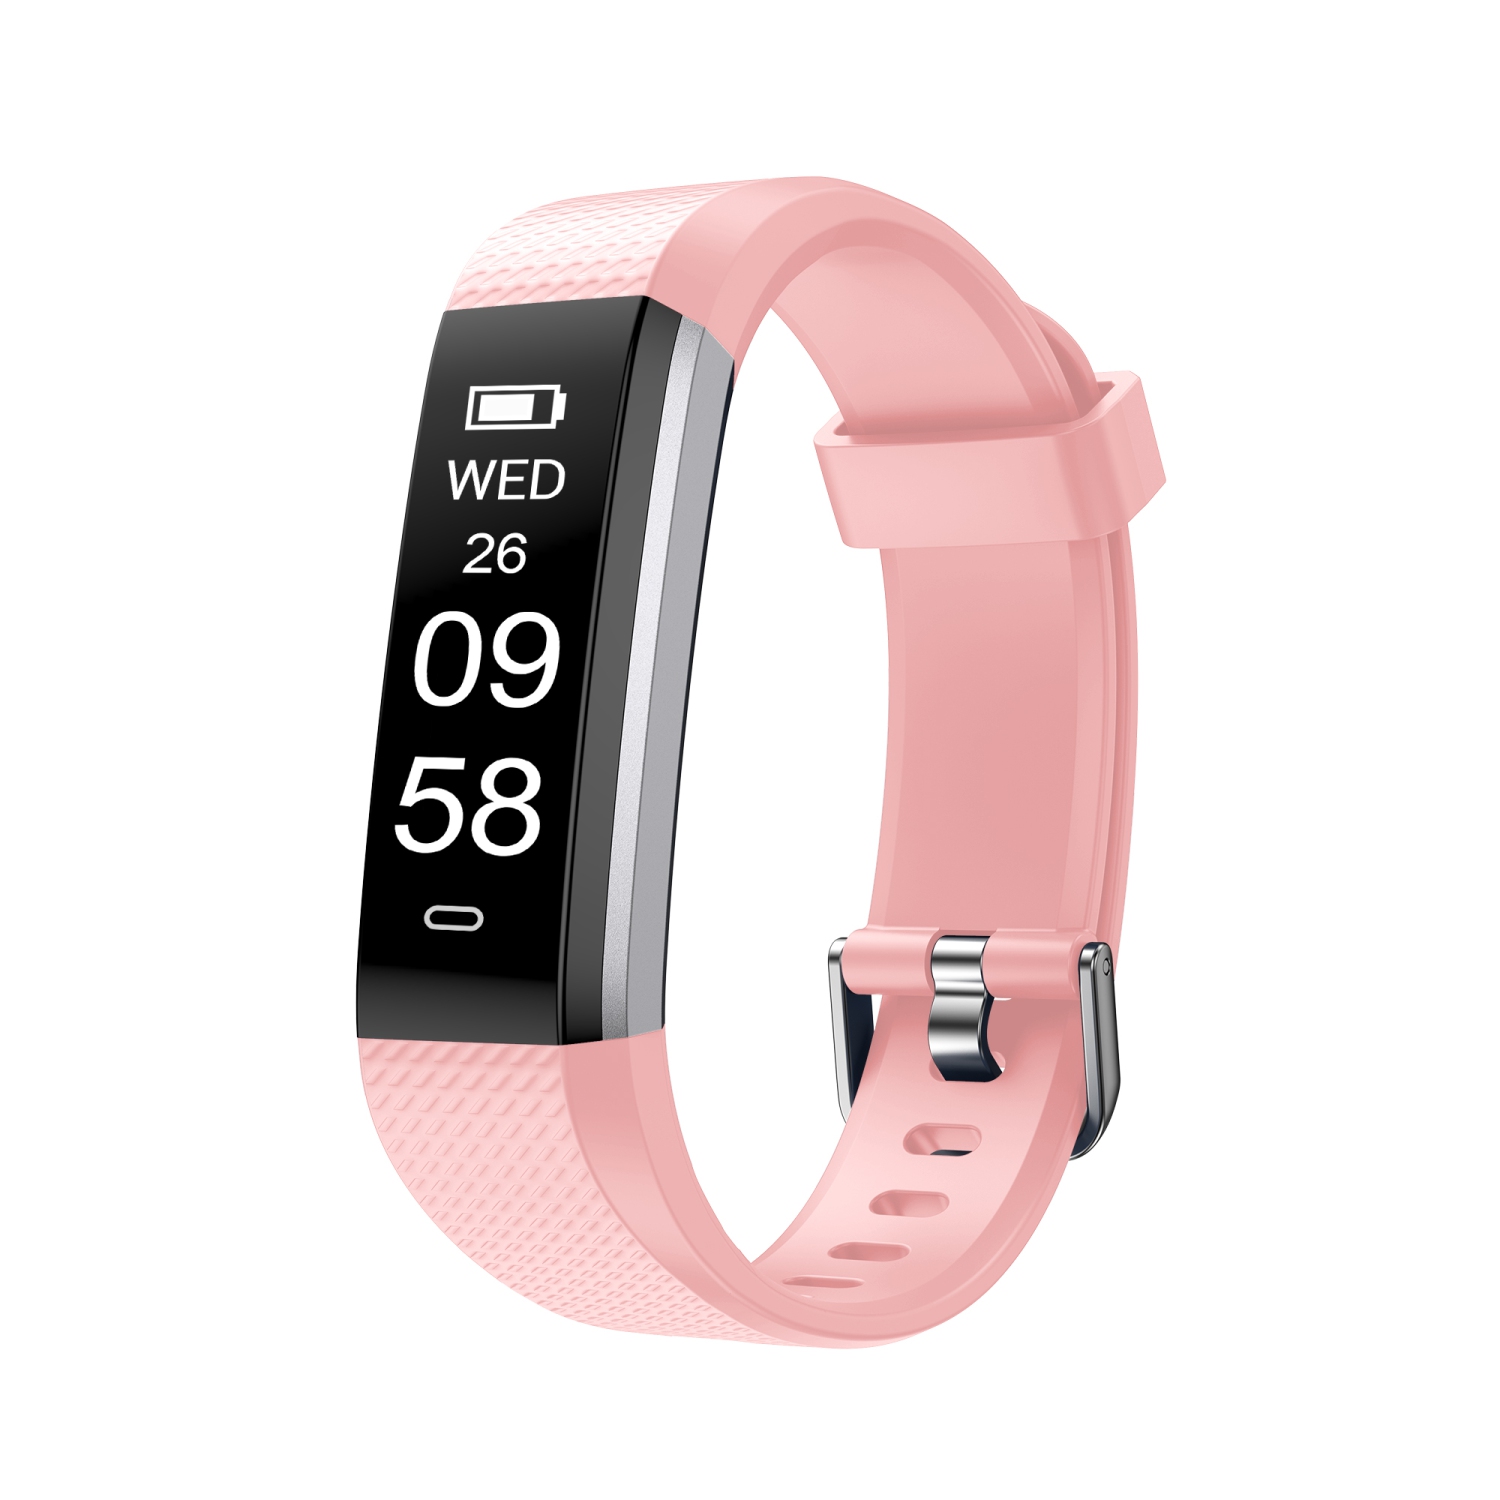 Letscom ID115 Health and Fitness Tracker by Letsfit - Pink